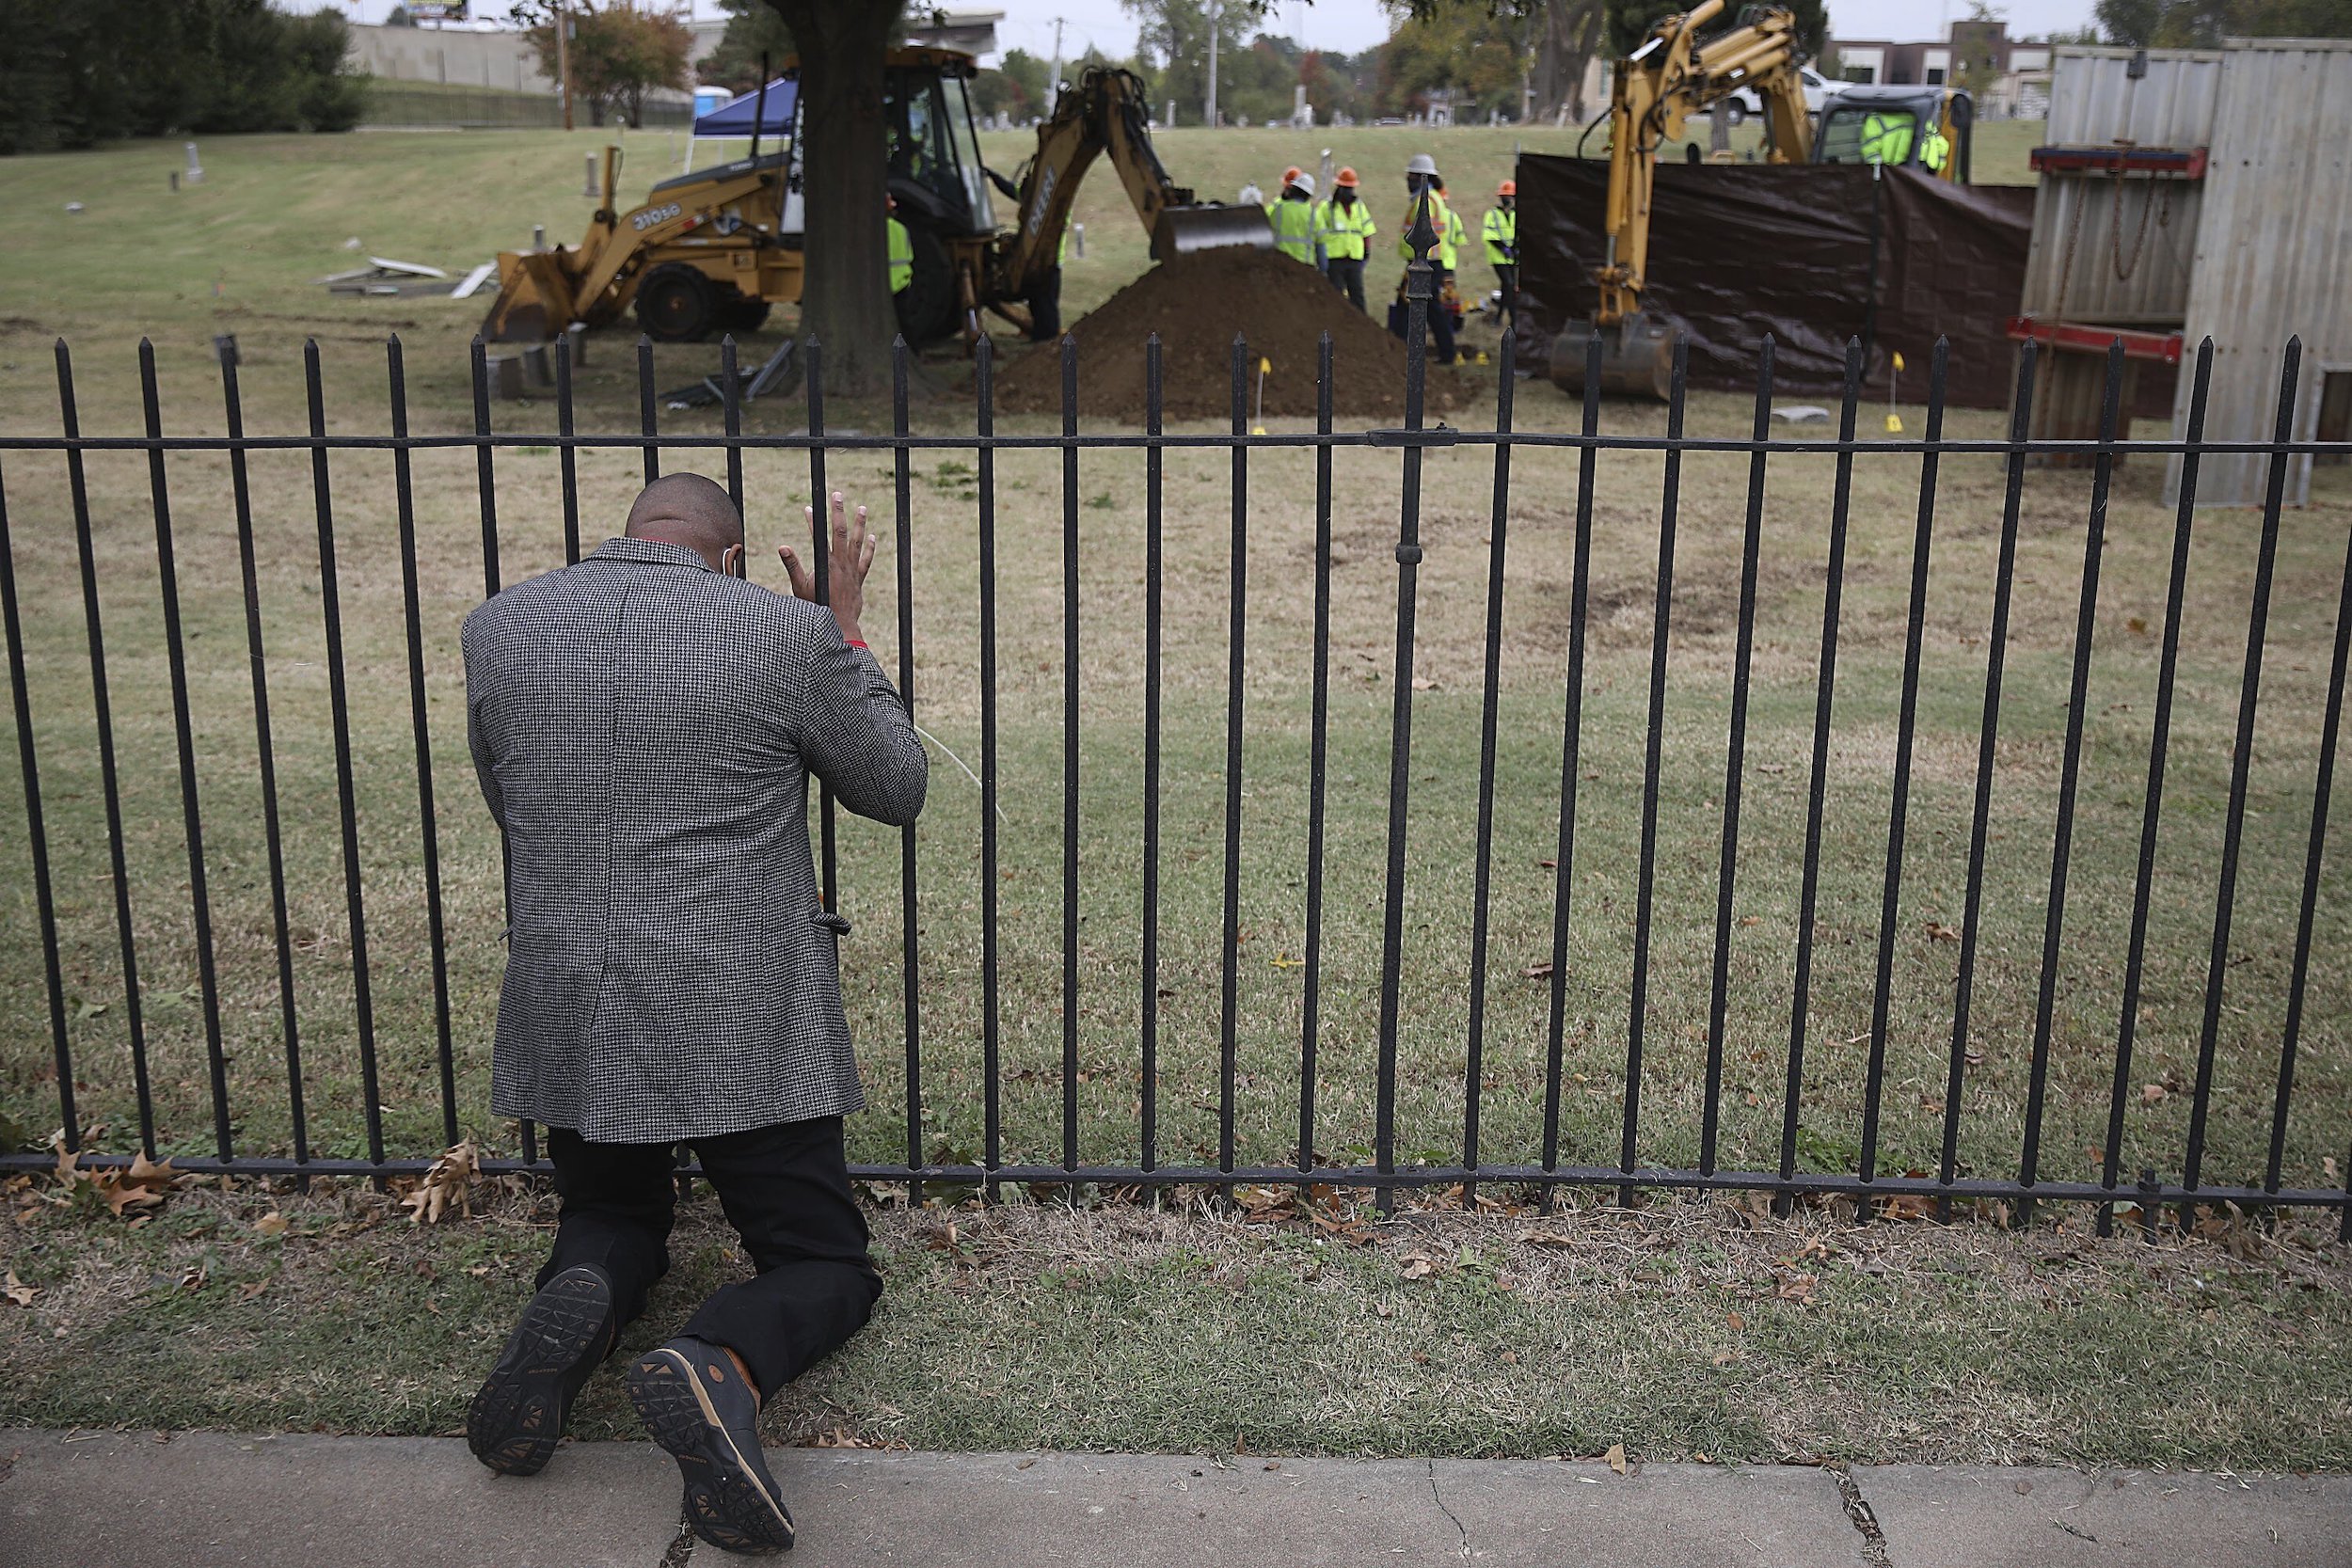 Remains Found In Search For 1921 Tulsa Race Massacre Victims Courthouse News Service